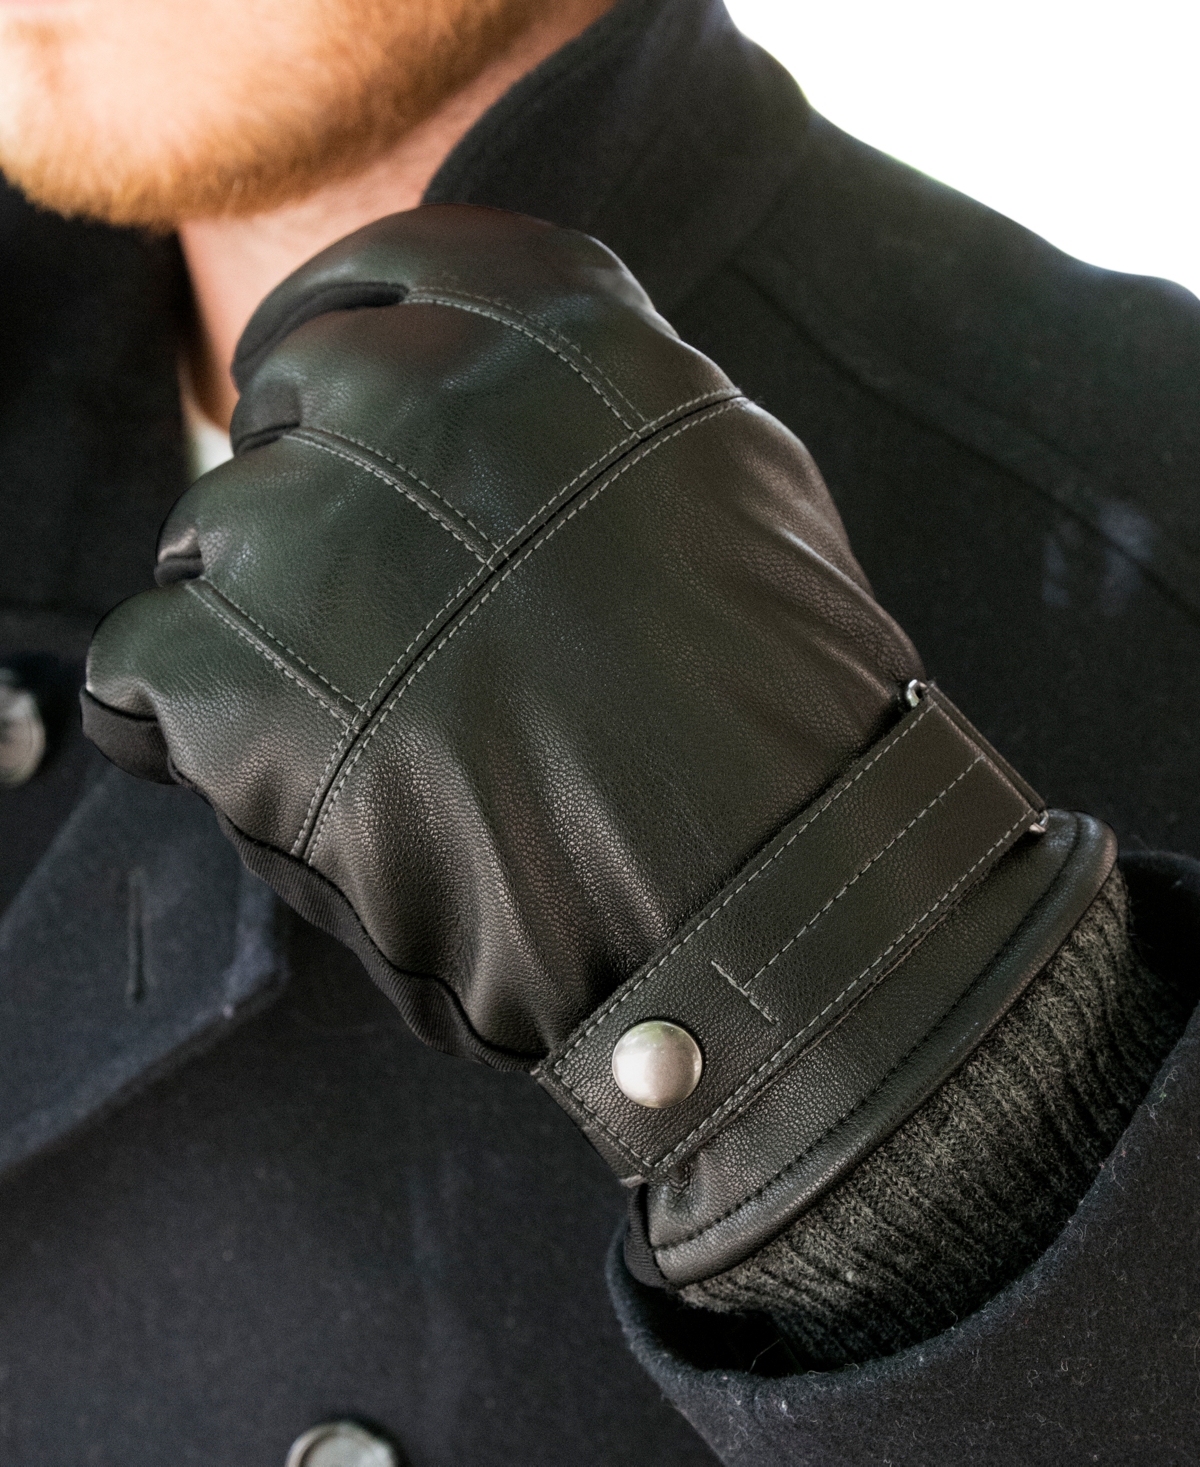 Shop Isotoner Signature Men's Touchscreen Insulated Gloves With Knit Cuffs In Black